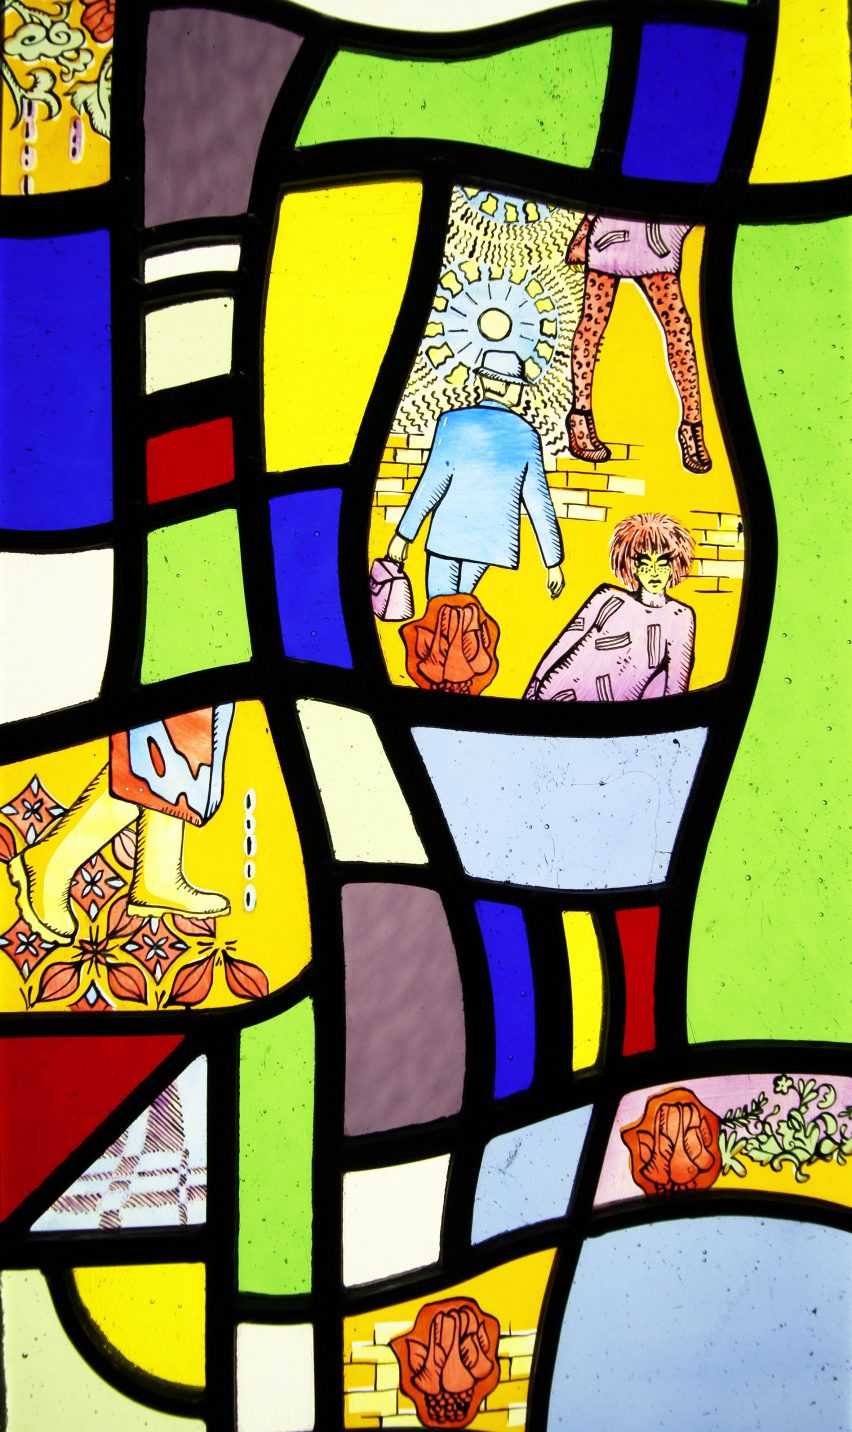 A visualisation of a stained glass window in colours of green, blue, red and yellow, with illustrations of people in parts of the glass.